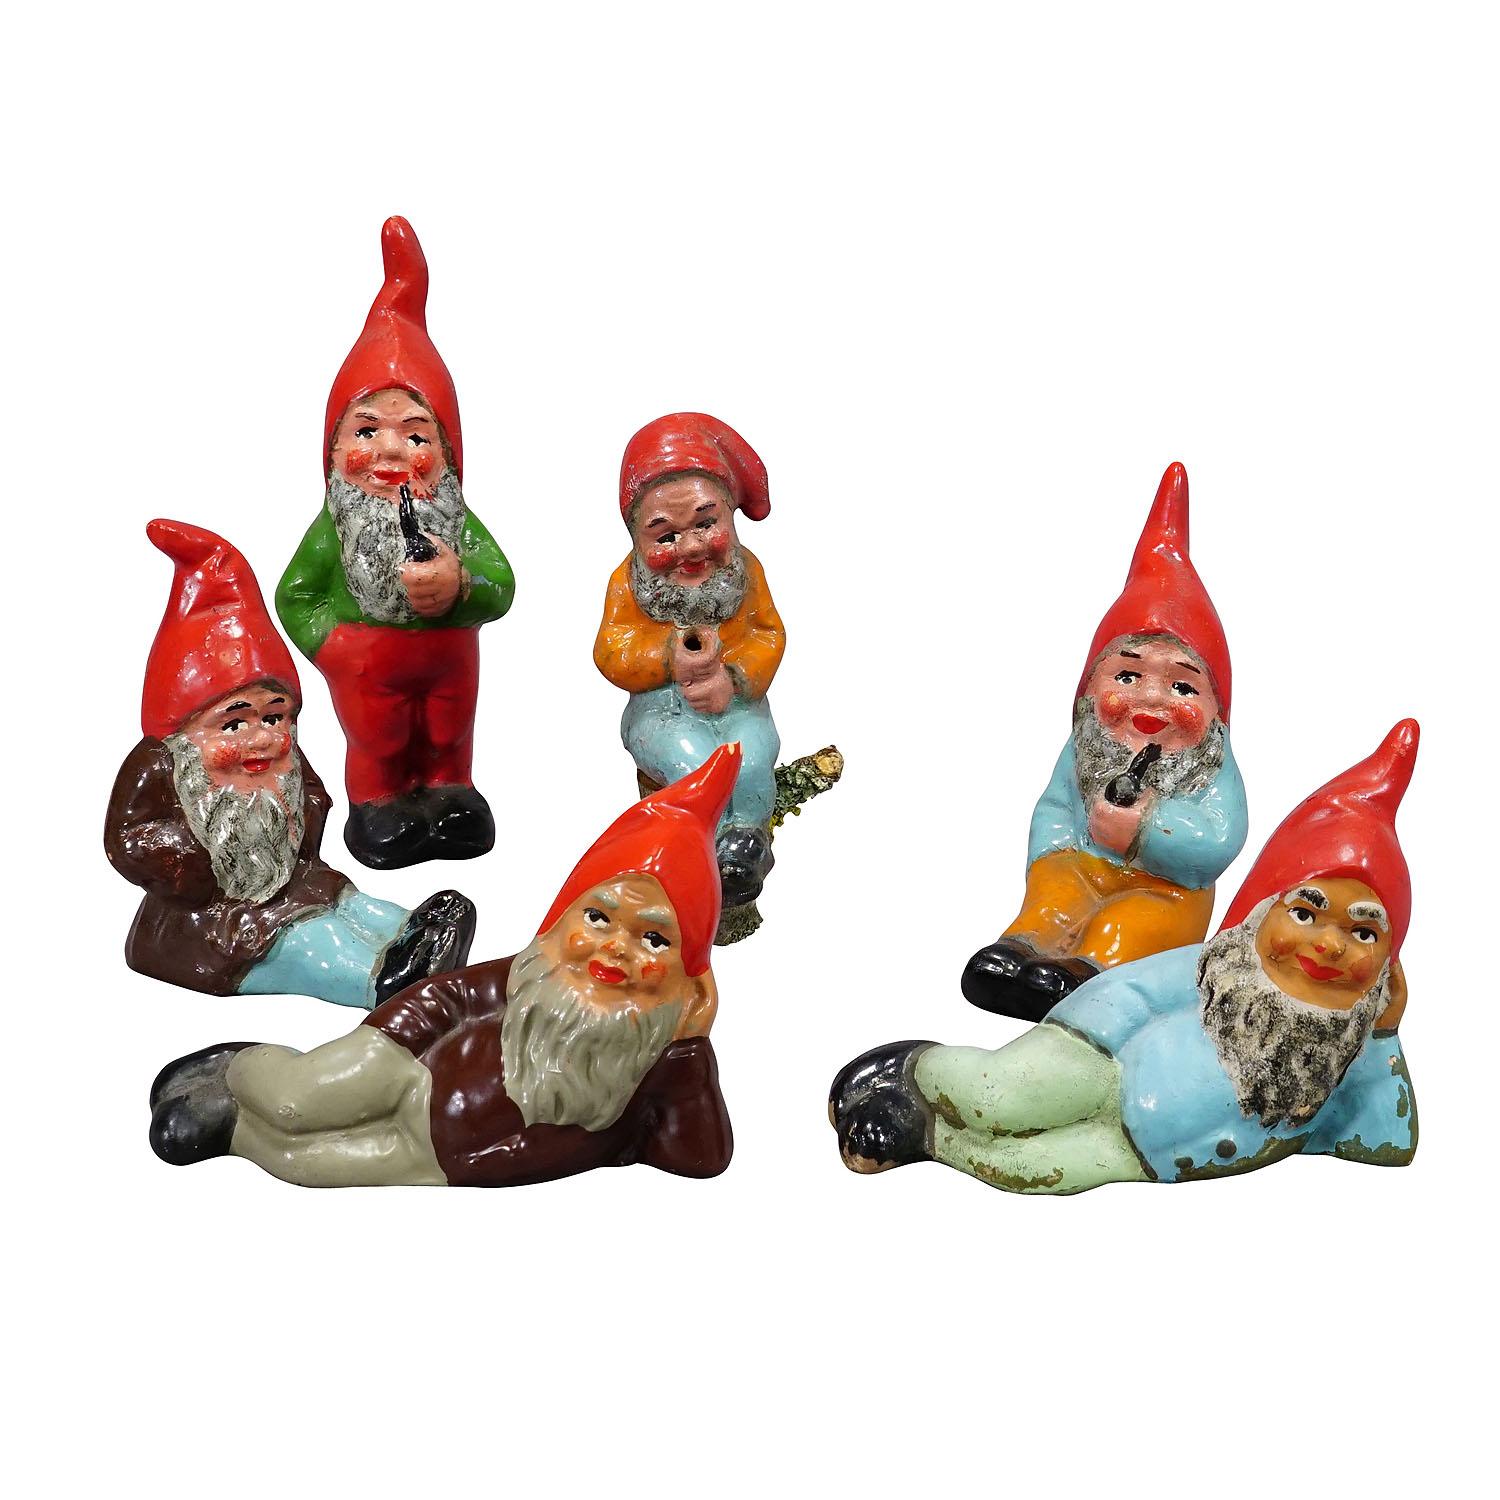 Lot of Six Tiny Terracotta Garden Gnomes, Germany ca. 1950s

A whimsy set of six tiny garden gnomes made in Germany ca. 1950s probably by Heissner. They are made of terracotta and hand-painted with bright colors. Good used vintage condition with